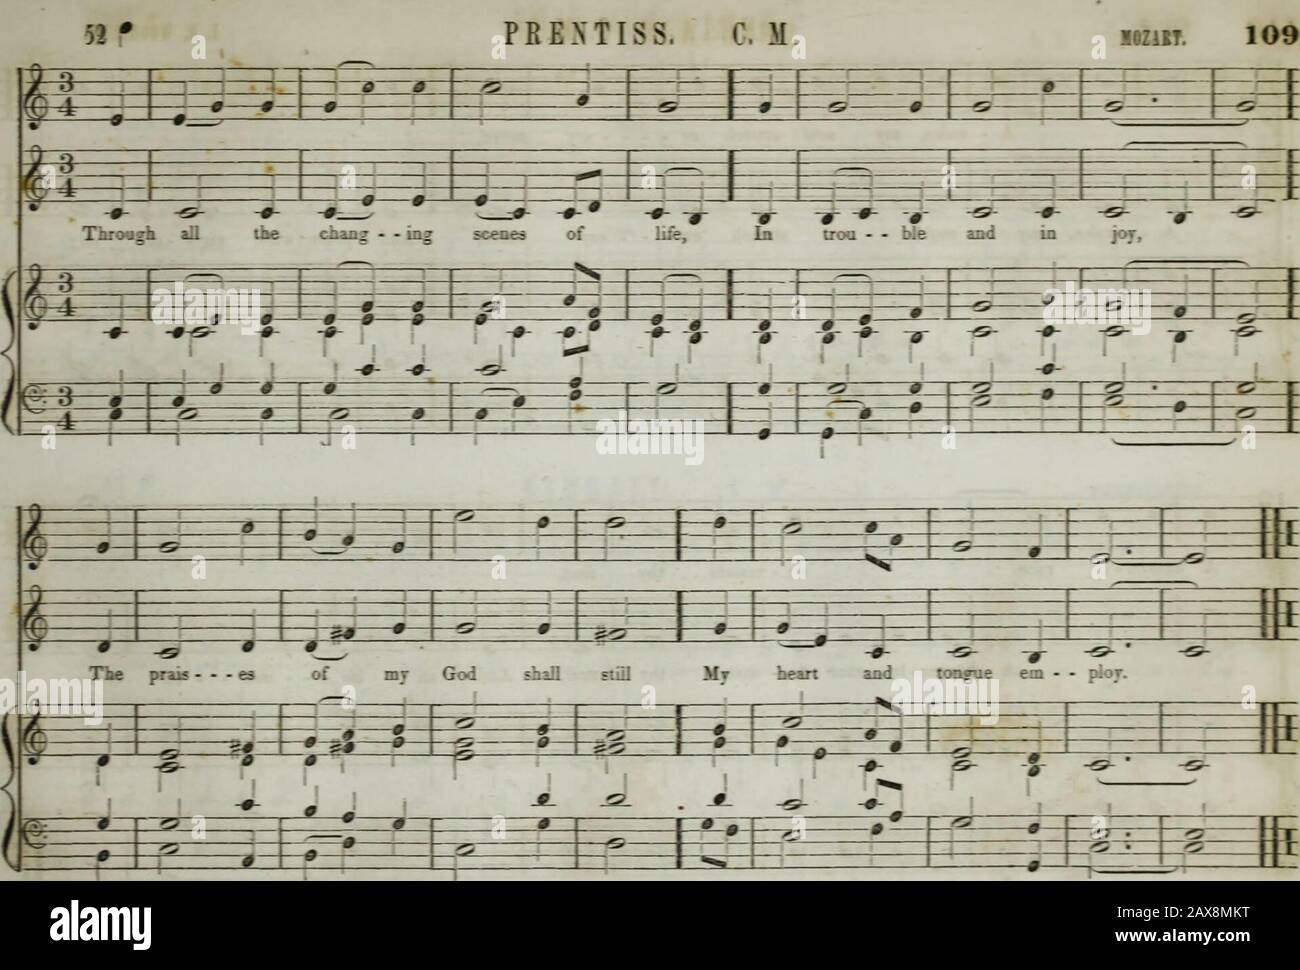 The Boston Musical Education Society's collection of church music : consisting of original psalm and hymn tunes, select pieces, chants, &c.; including compositions adapted to the service of the Protestant Episcopal Church . -I—rr I #—# - - a - ted things, Sound our Im - man - uels praise. [ .jS—f II * ? I A - - - - - men, A-men,^ ? L  I ( f J J I ?5p men. r =0- 1. 110 80 * EHIA. CM. 1. B. WOODBURY. L - r» # -f* t f- f— -«i j rr H* ^ f ^— 1 [A - A 1 1 M wake, my soul! stretch ev - - - - ery —H nerve, —r -1-111 = ? Wi j- r- — —1 1 —J & 1 J . j —1 - •r ?? ? * 1—& & 1 - wake, my I 1i 1 cs&gt; — Stock Photo